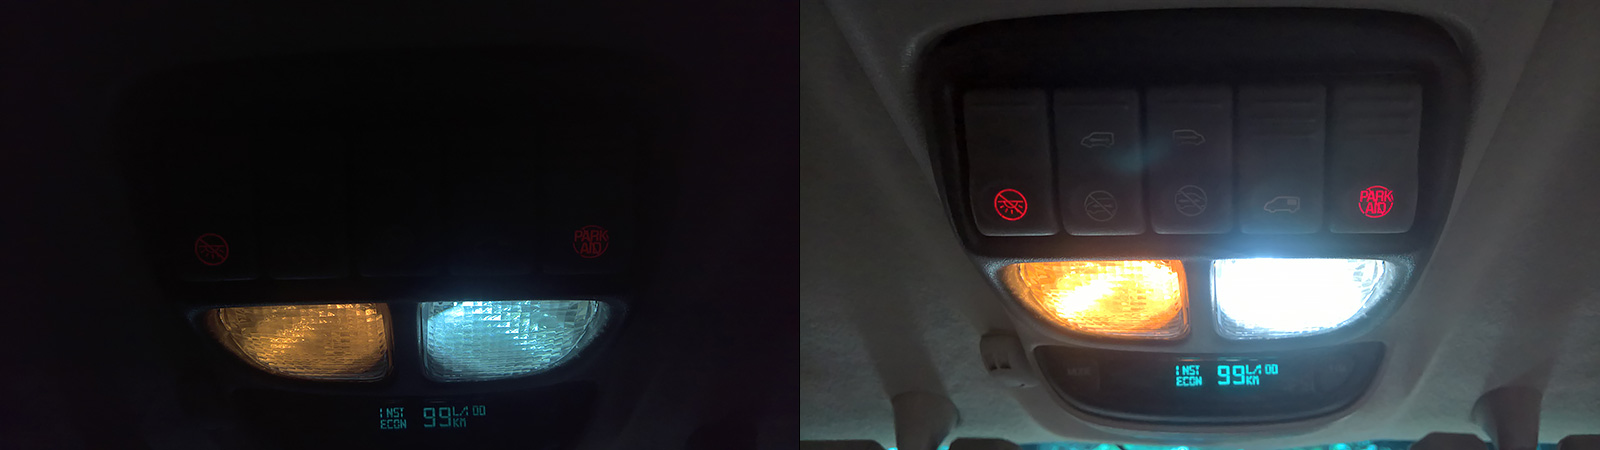 Pontiac Montana overhead dome LED lights conversion and comparison in brightness and color temperature